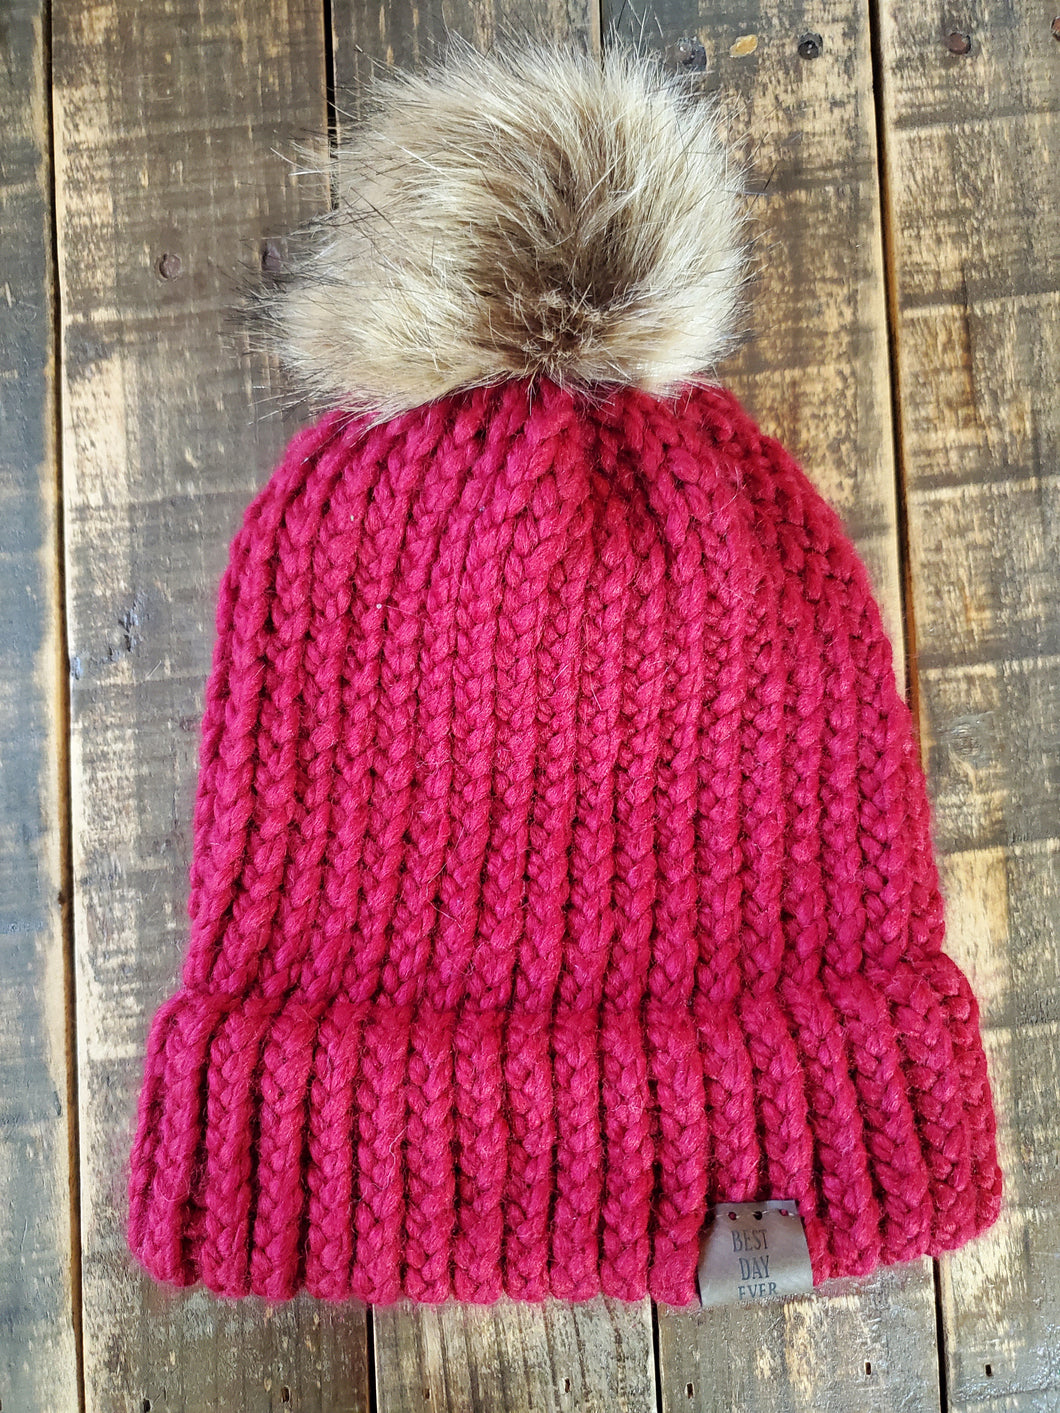 Red Hat with Brown Pom-Pom